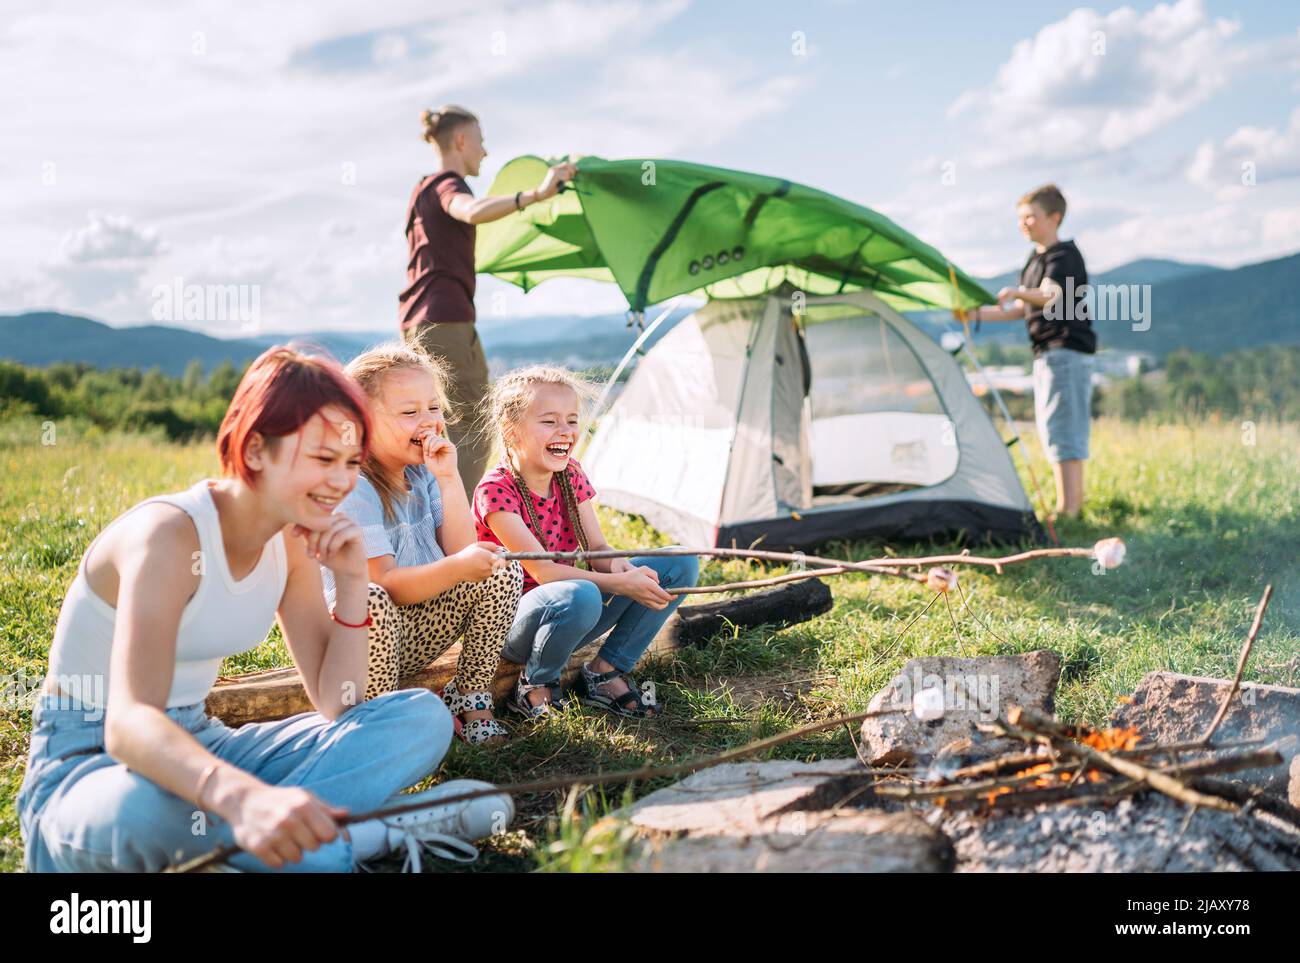 Three sisters cheerfully laughing and roasting marshmallows and candies on sticks over campfire flame while two brothers set up the green tent. Happy Stock Photo